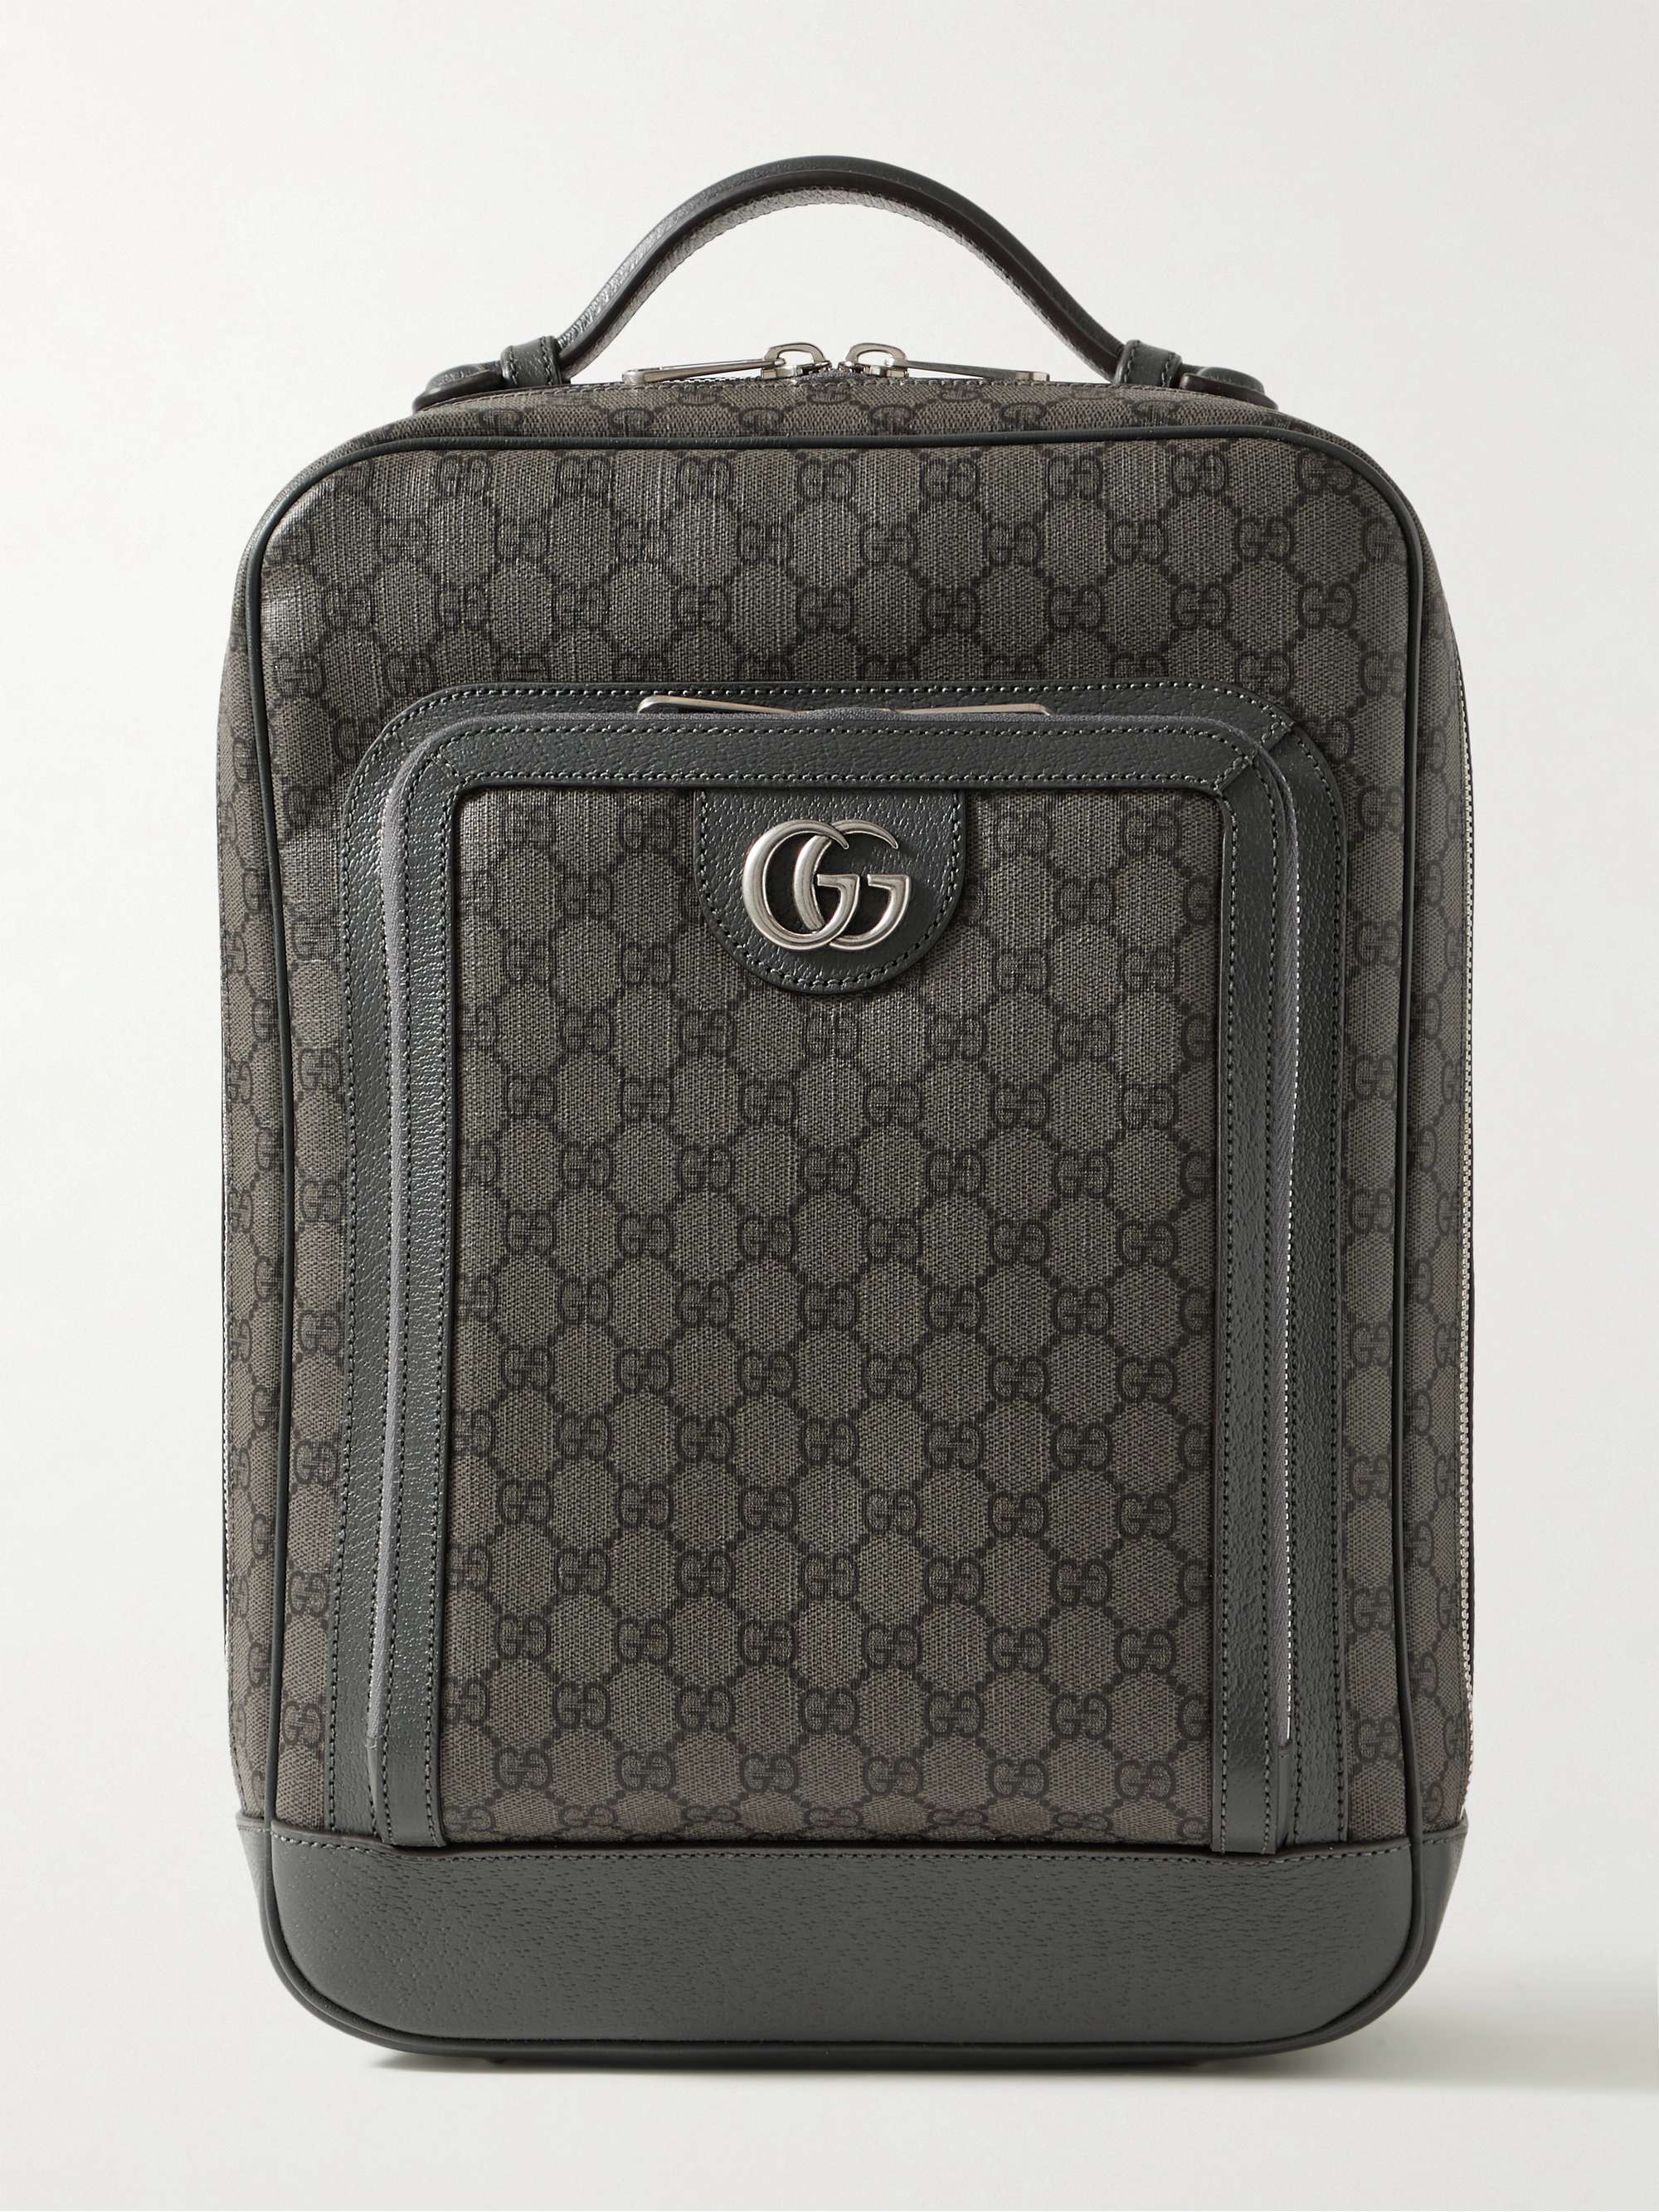 Gucci - Men - Ophidia Leather-trimmed Monogrammed Coated-canvas Backpack Gray